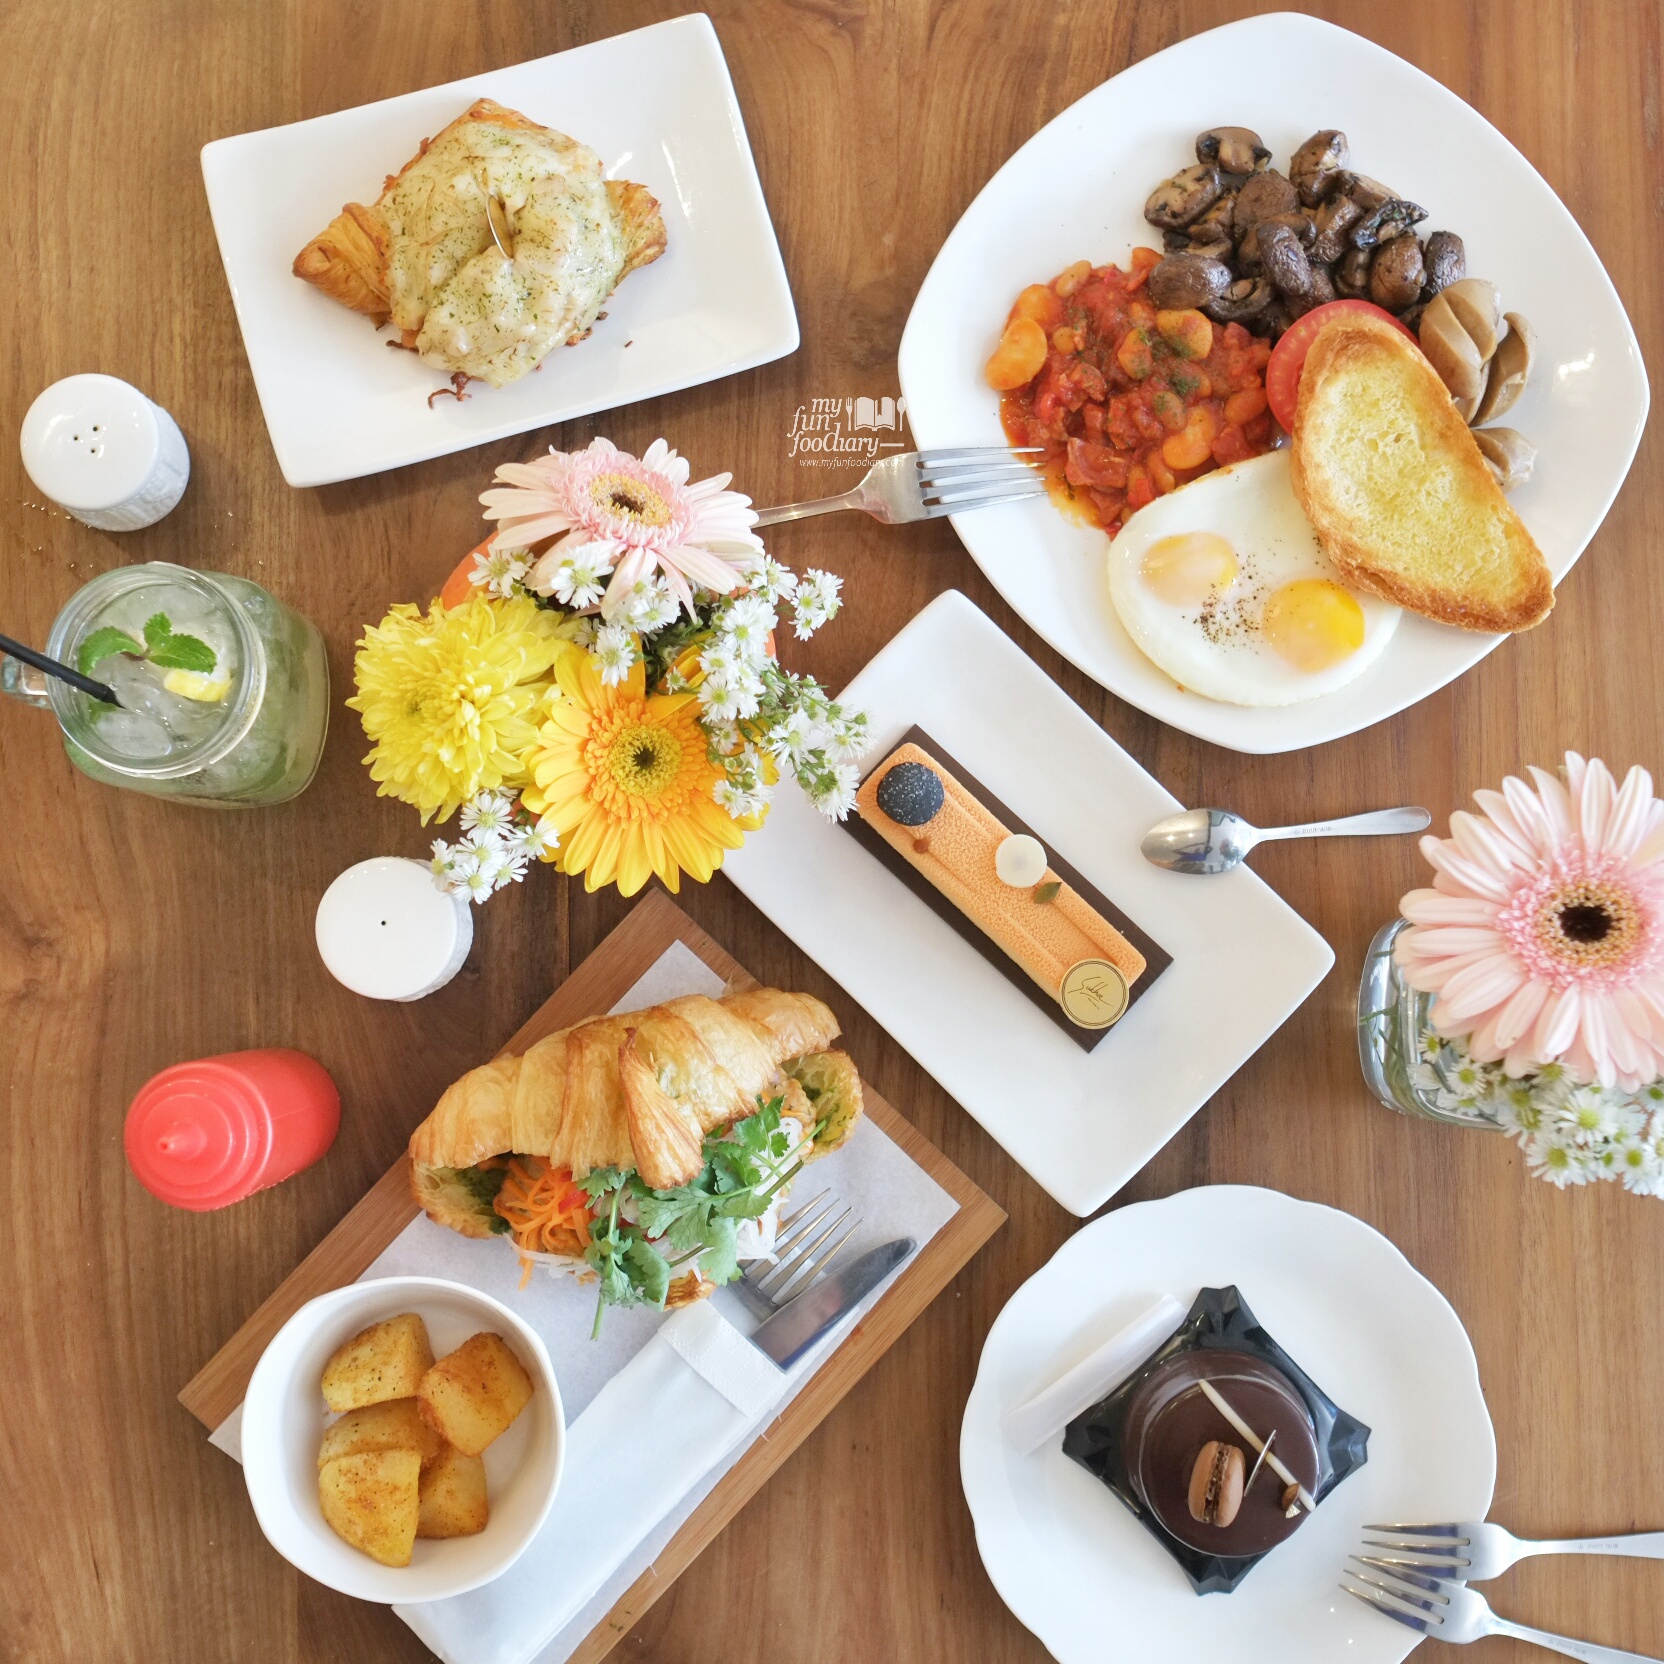 Tasty Food and Desserts at Sukha Delights in Bandung by Myfunfoodiary